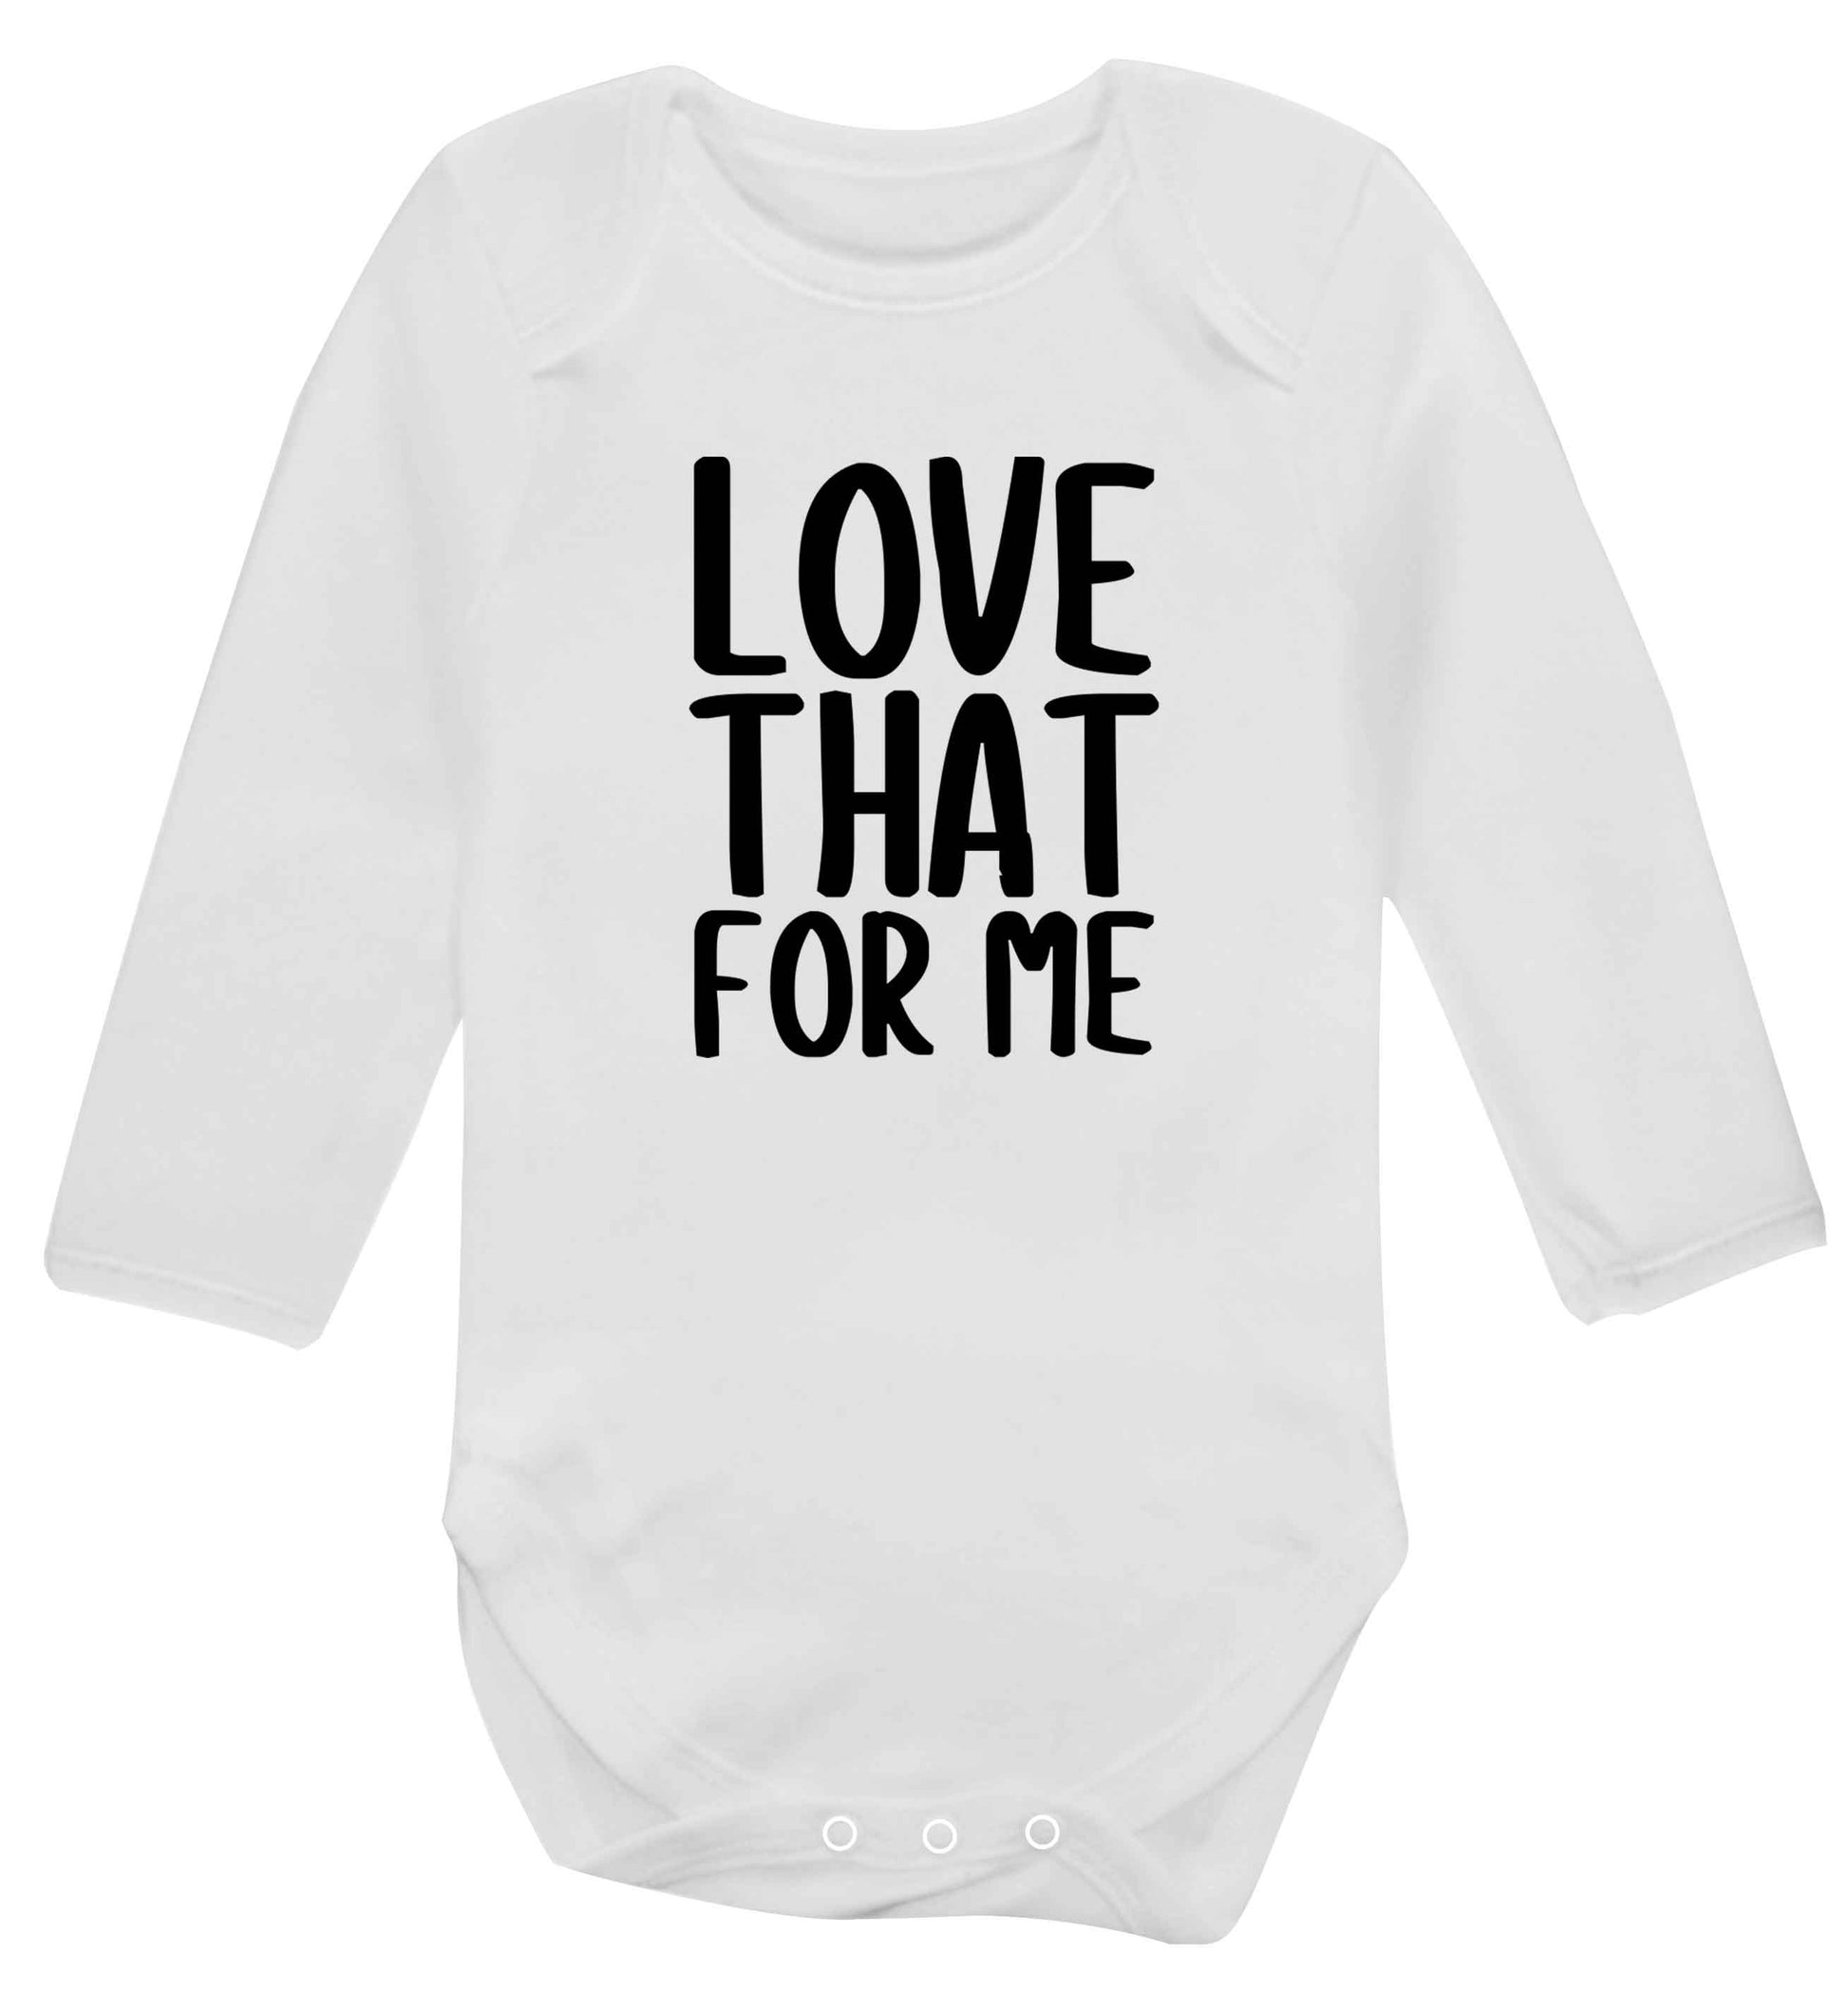 We love this for YOU! Who else loves saying this?!  baby vest long sleeved white 6-12 months